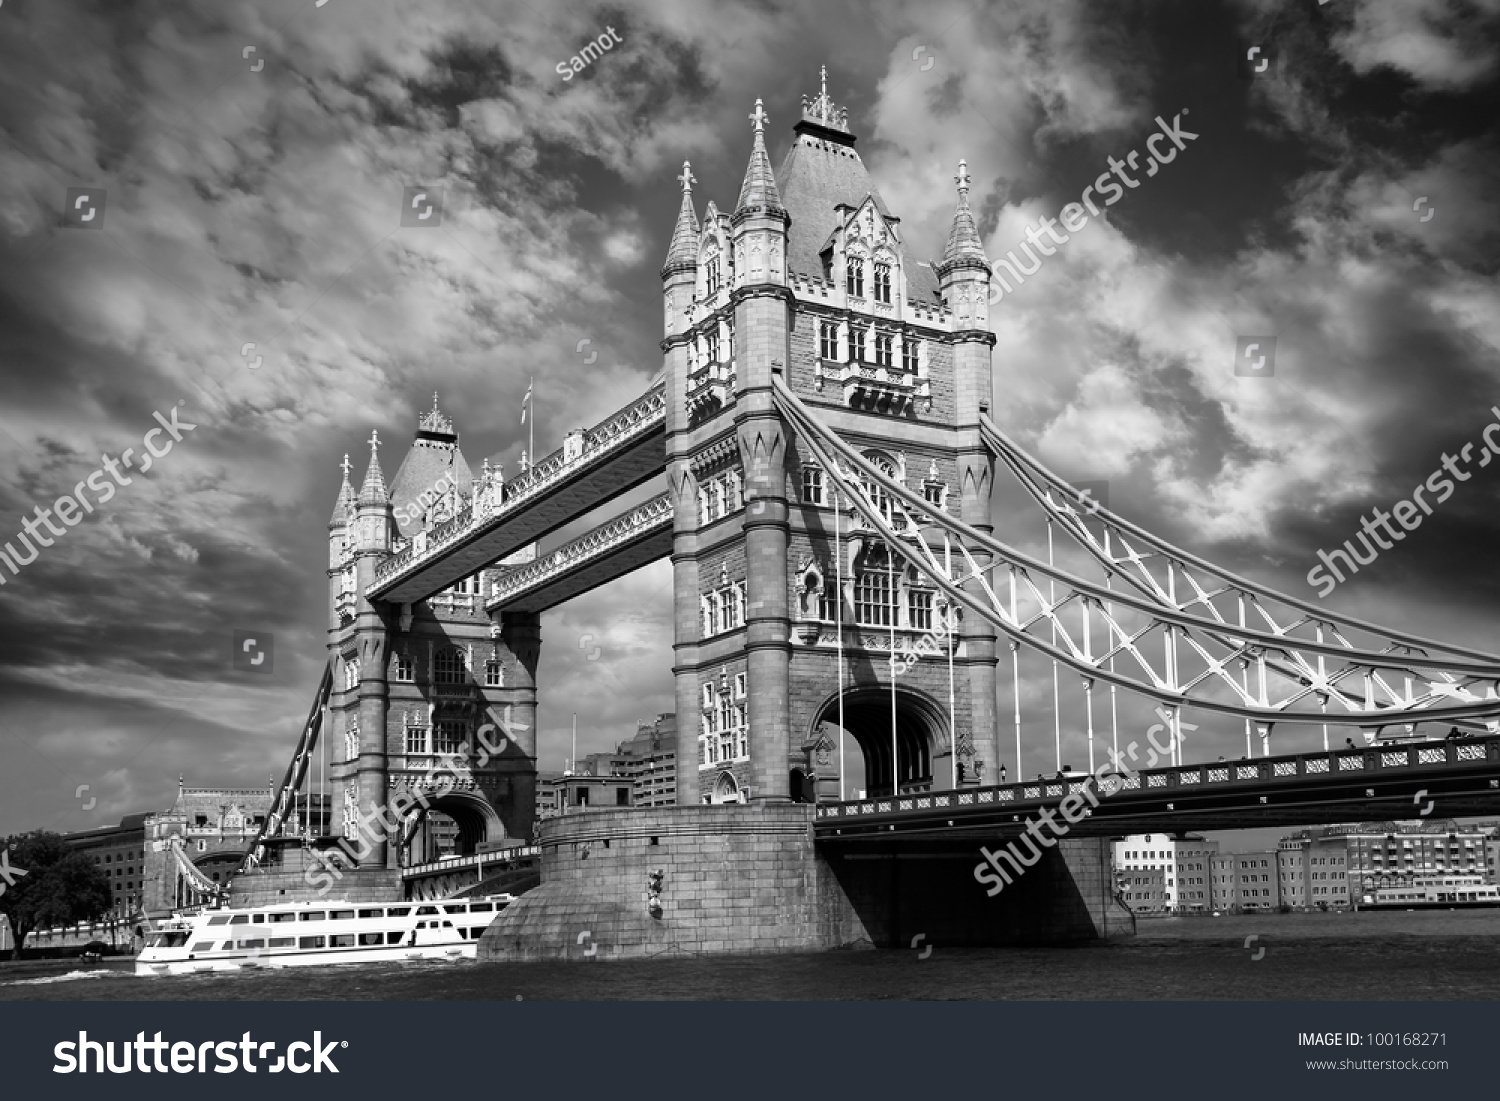 London Tower Bridge In Black And White Style, England Stock Photo ...